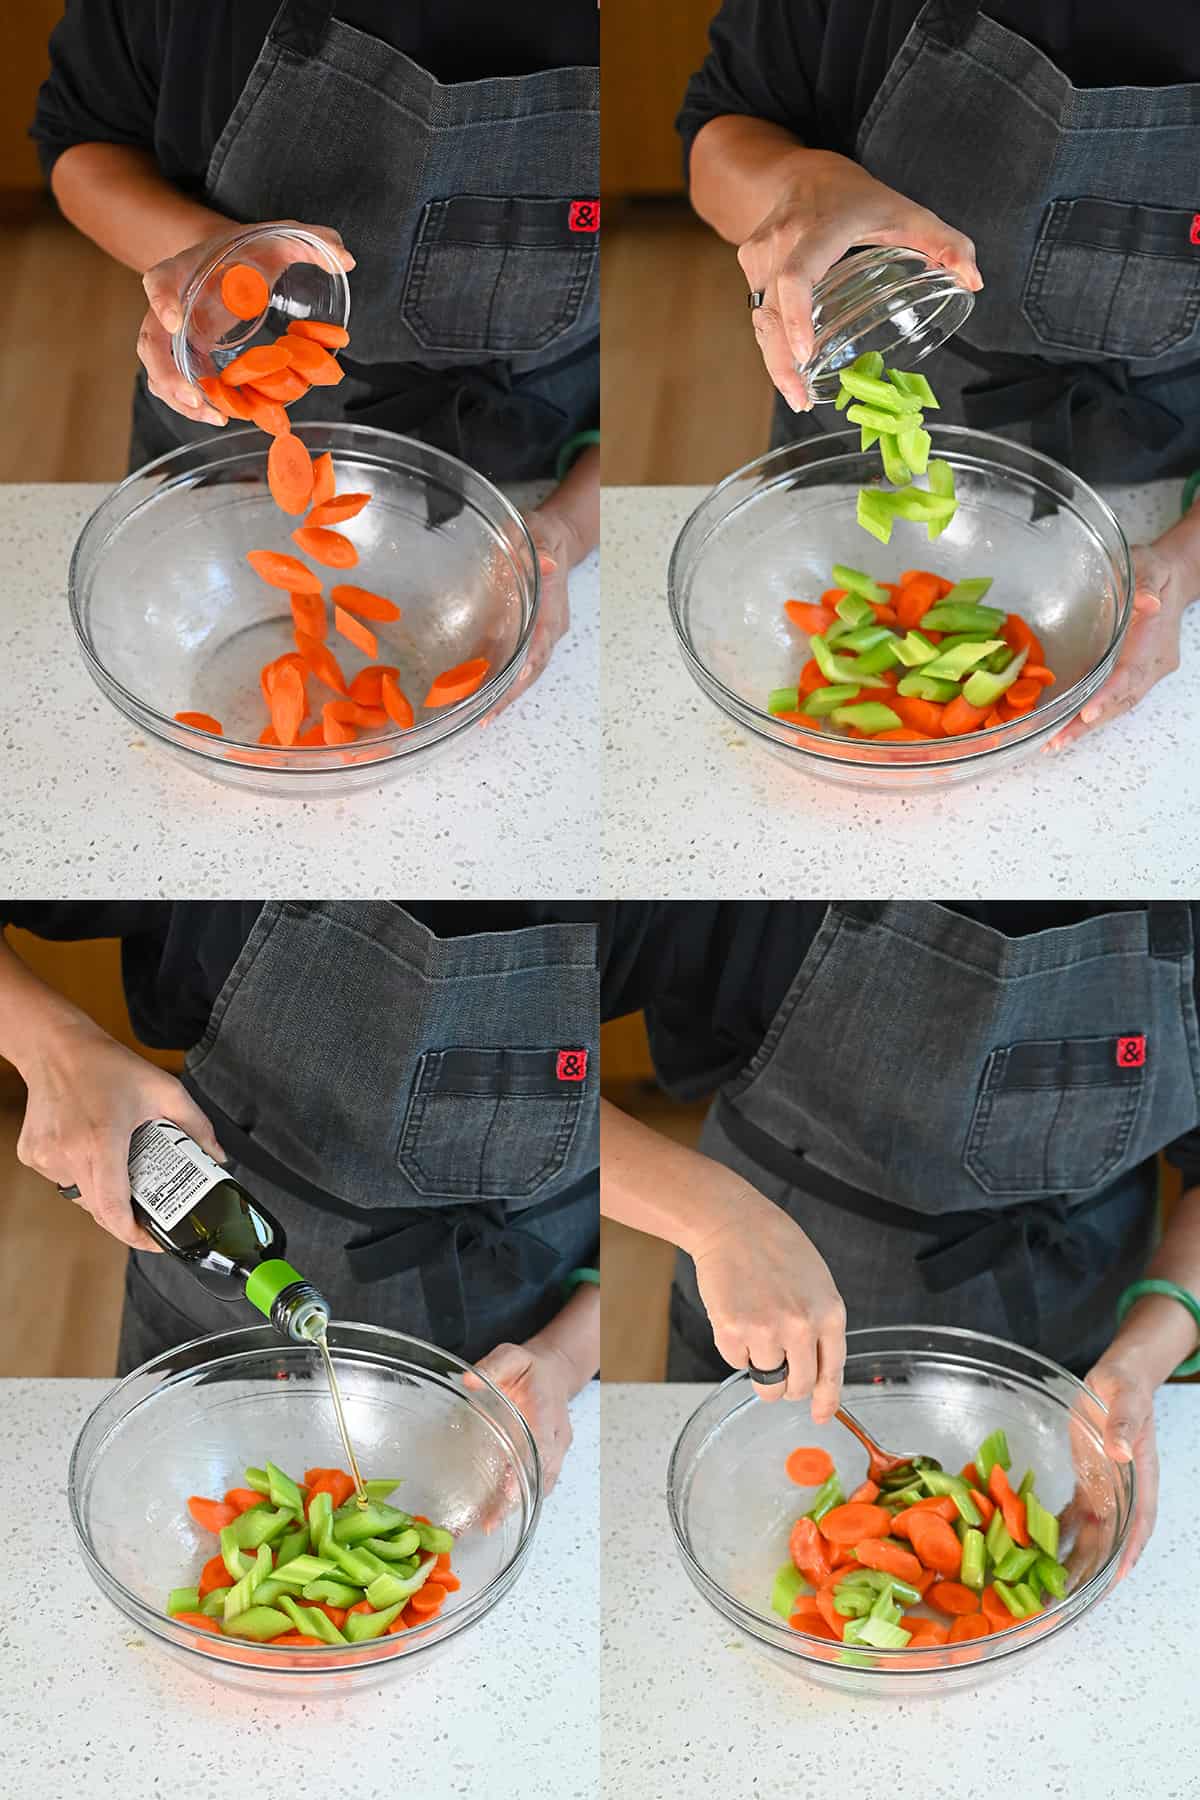 Four shots that show someone adding sliced carrots and celery to a bowl and tossing them with avocado oil.